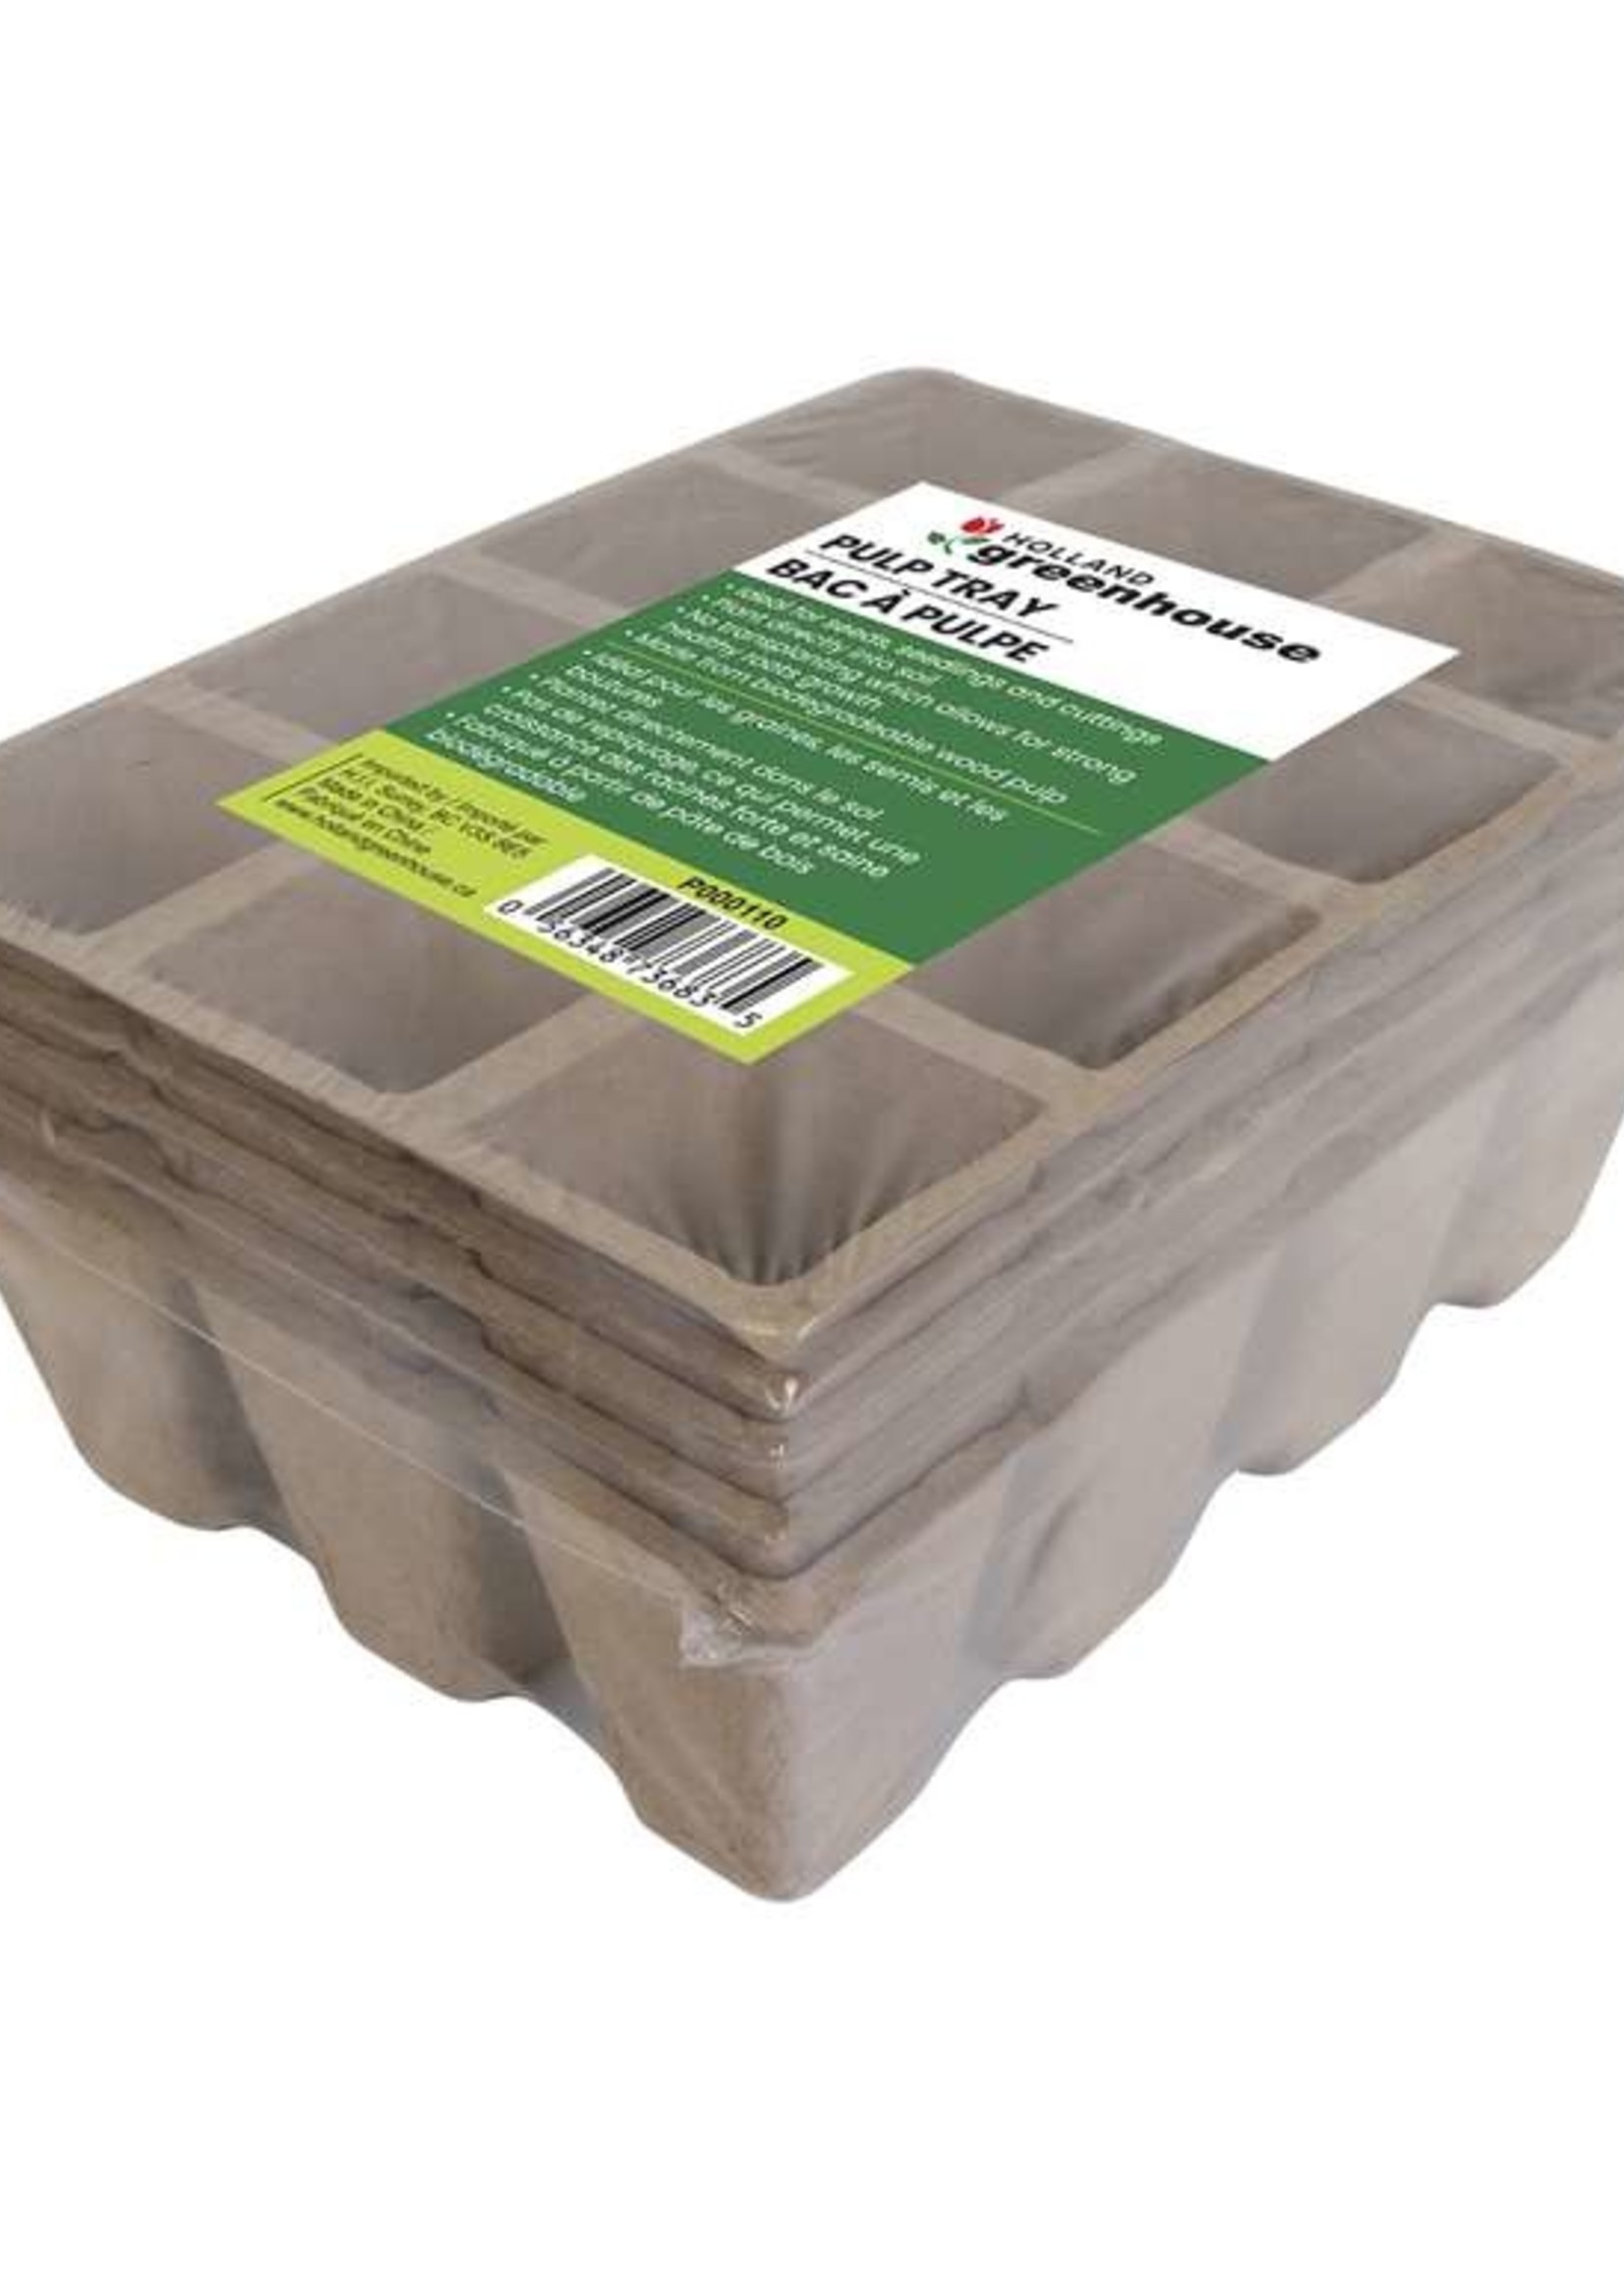 Holland Greenhouse 12 Cell Pulp Trays 1.5 in Square - 5 tray/pkg